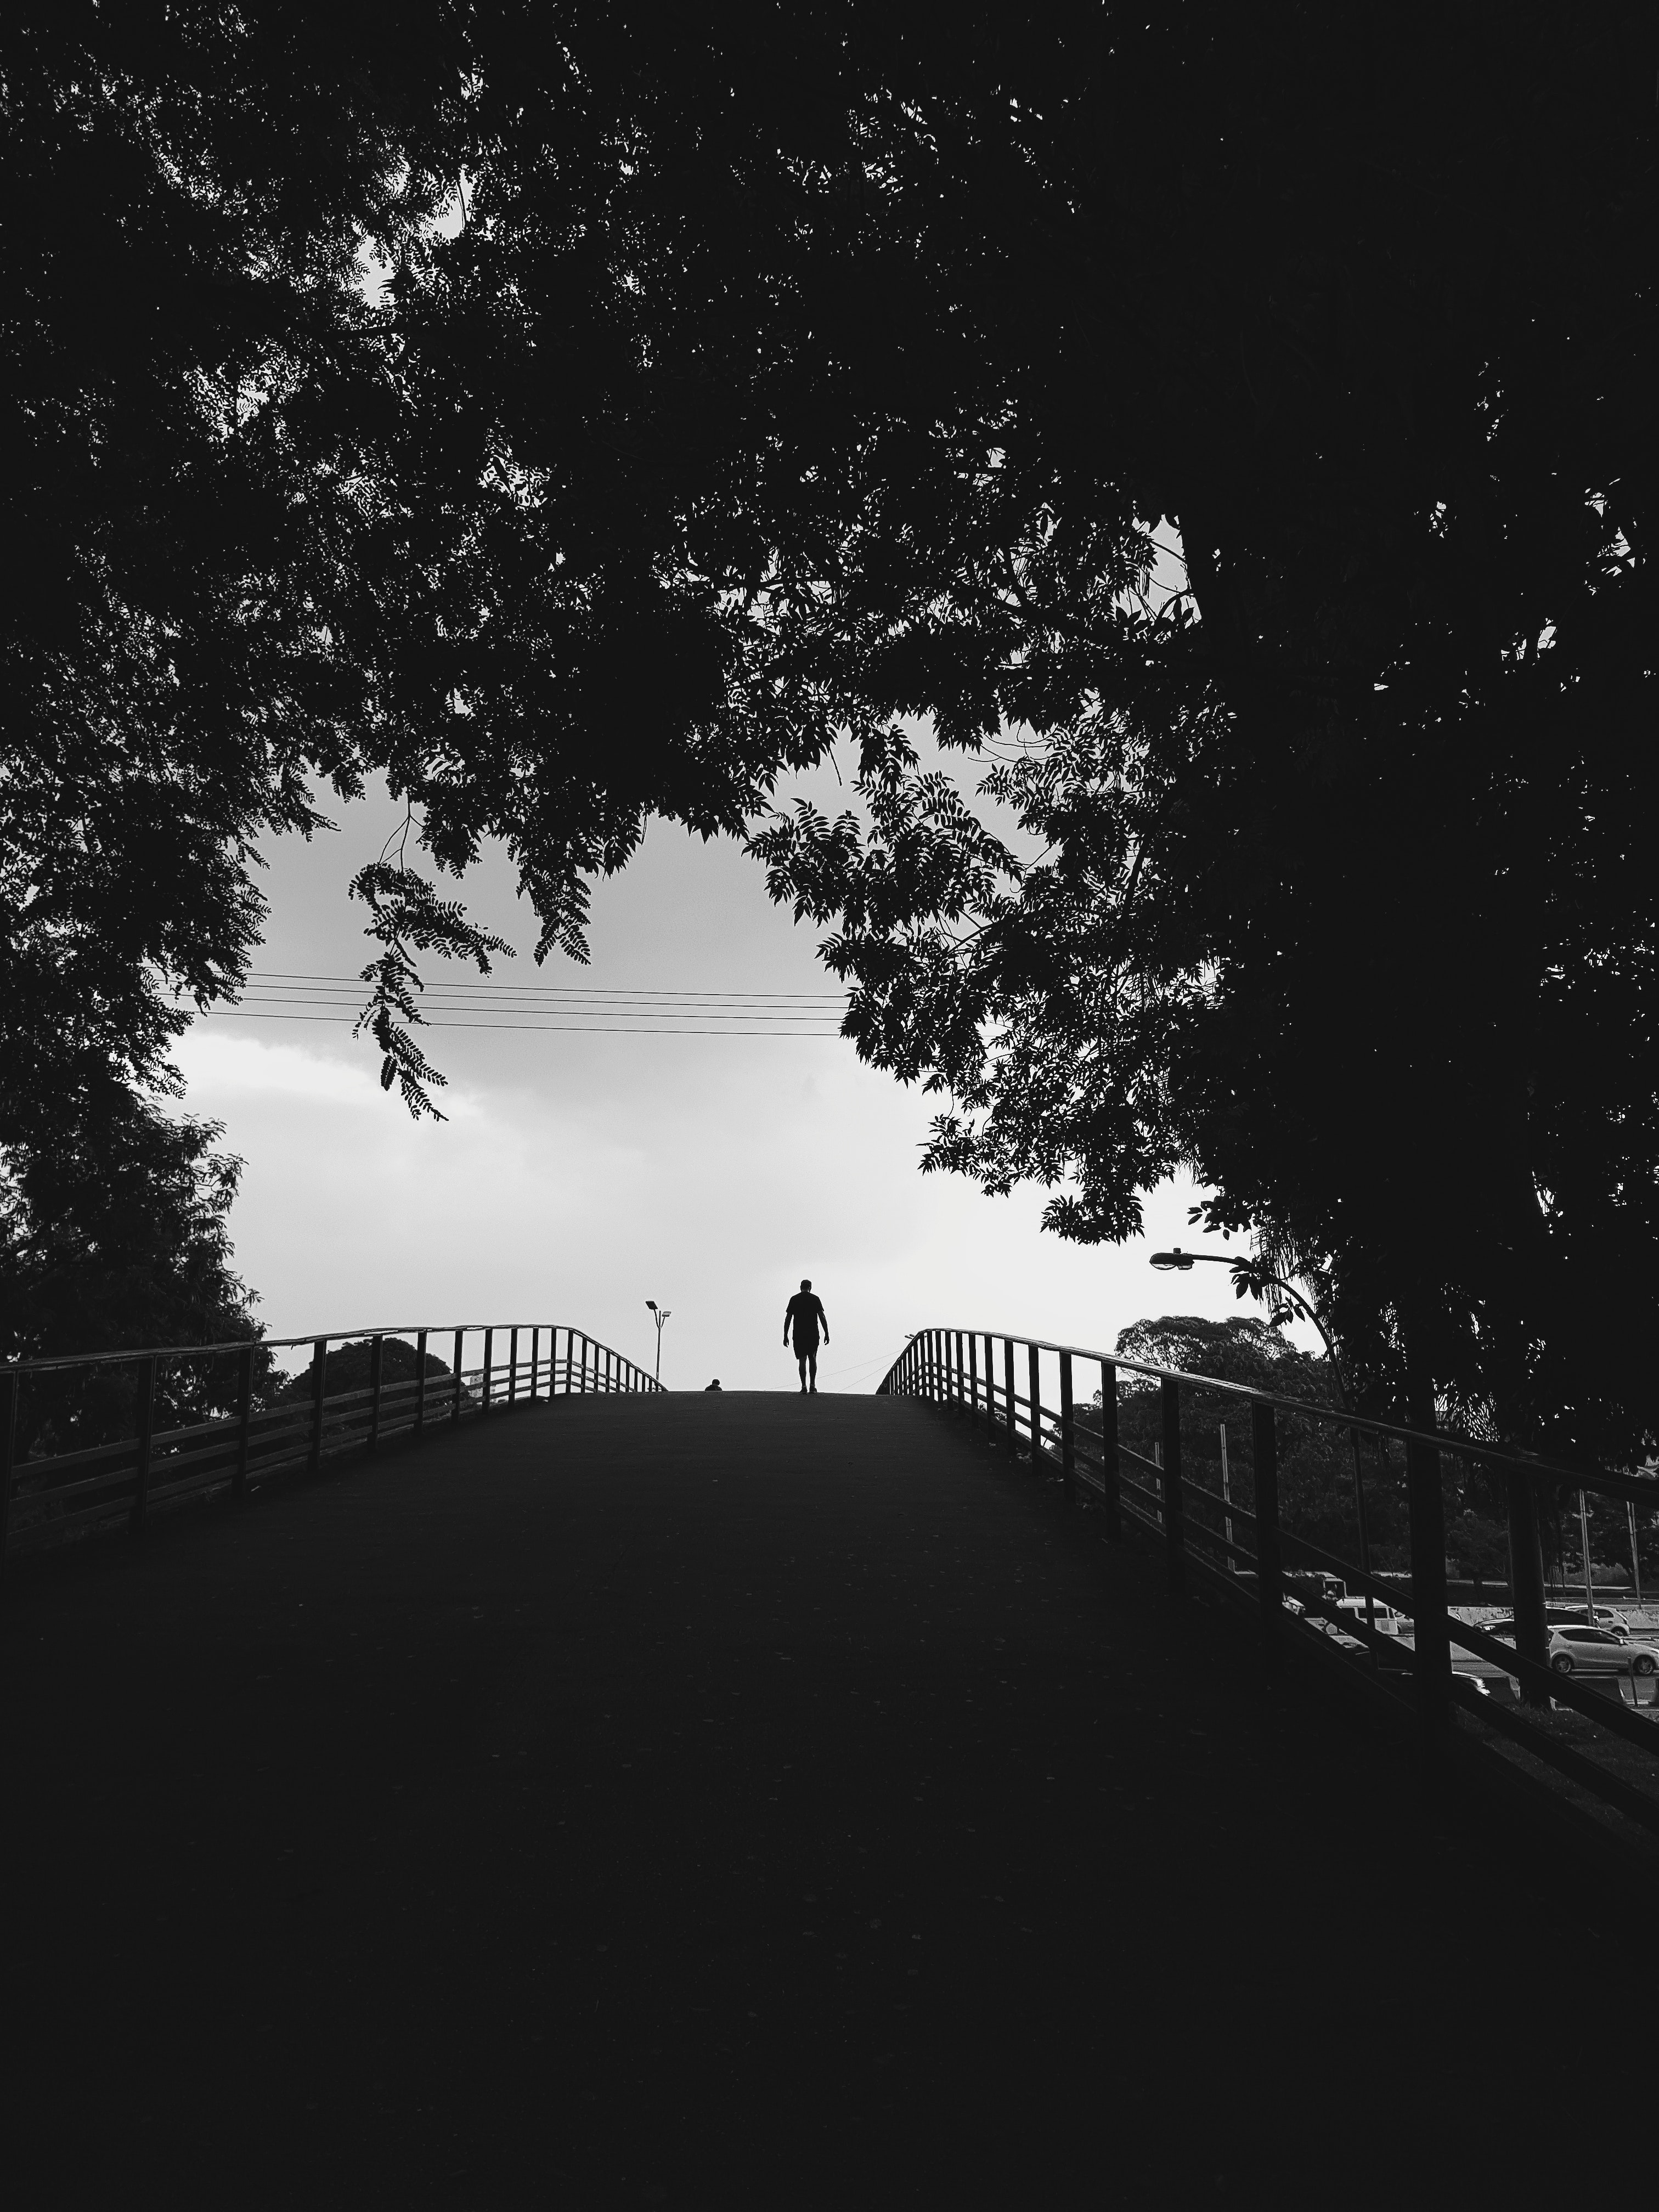 Lock Screen PC Wallpaper alone, trees, black, silhouette, stroll, bw, chb, loneliness, lonely